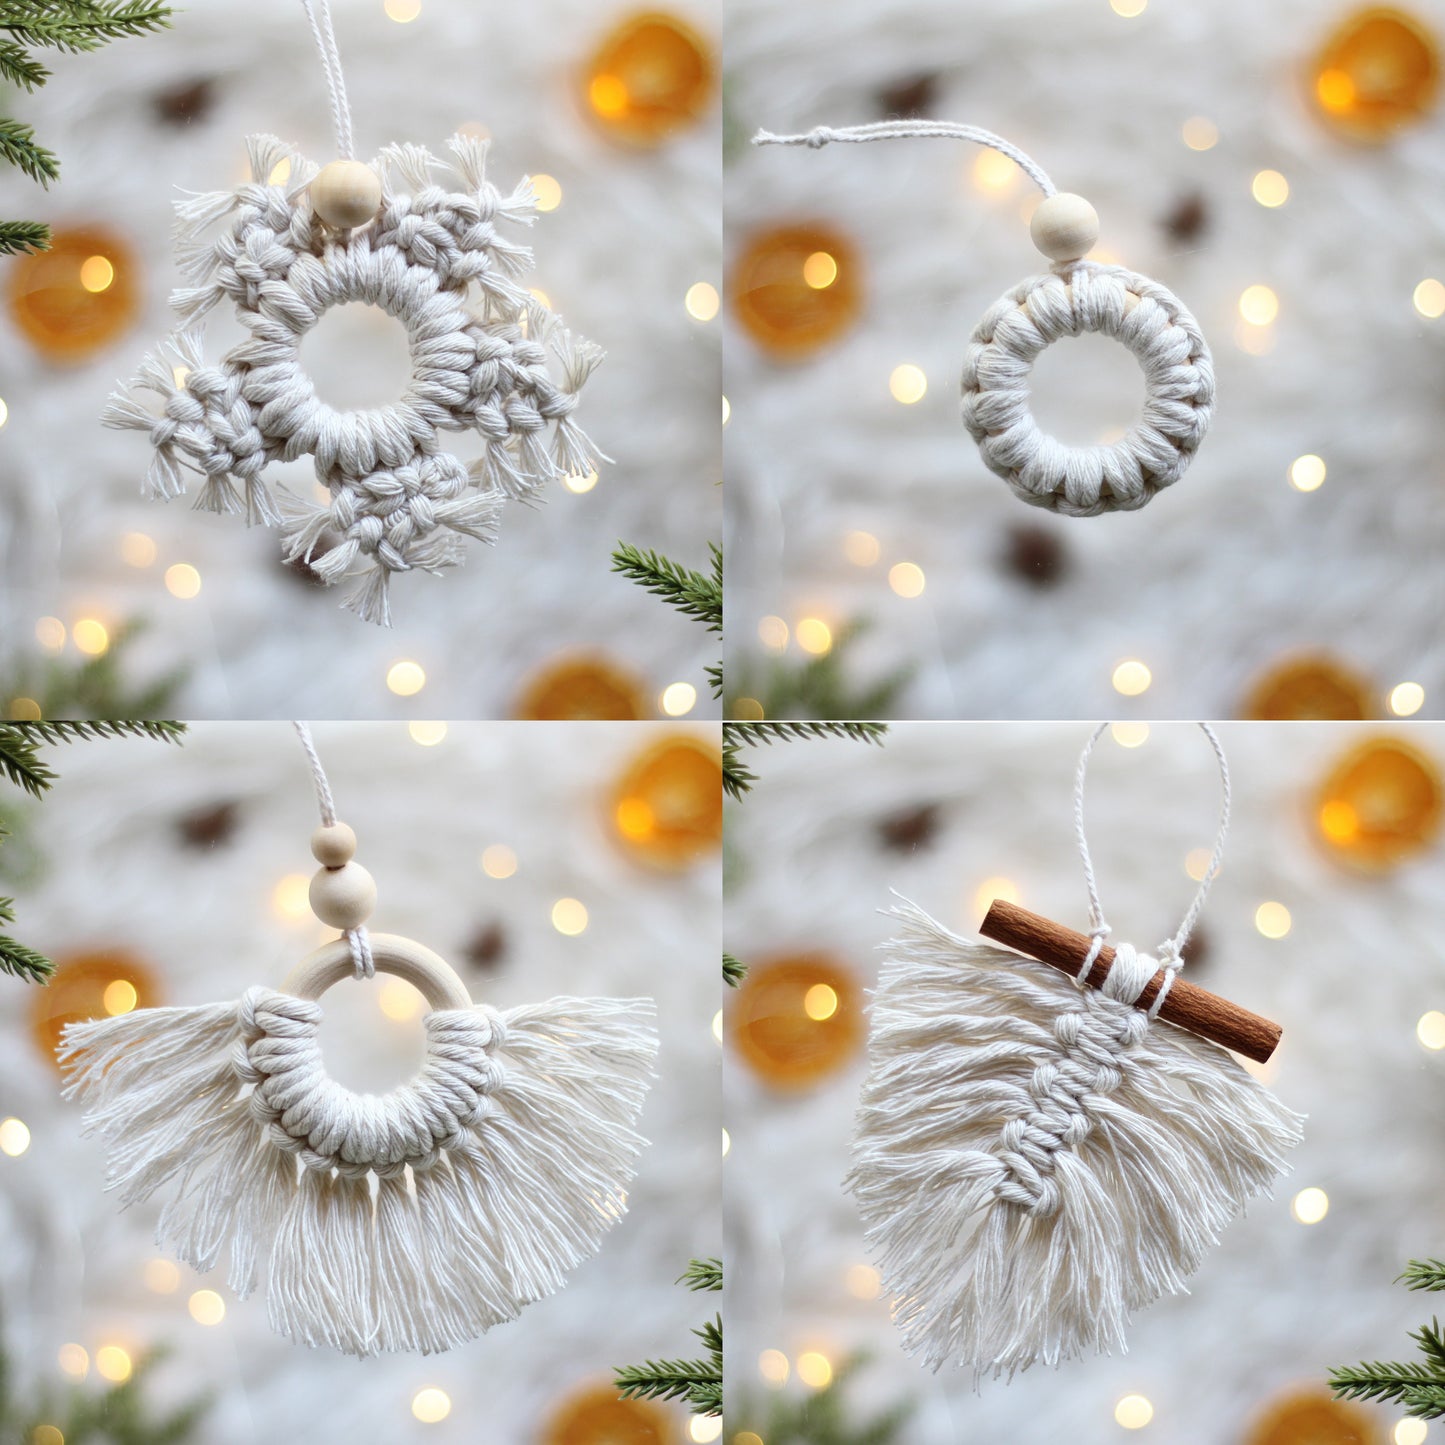 Make Your Own Macrame Christmas Decorations Craft Kit